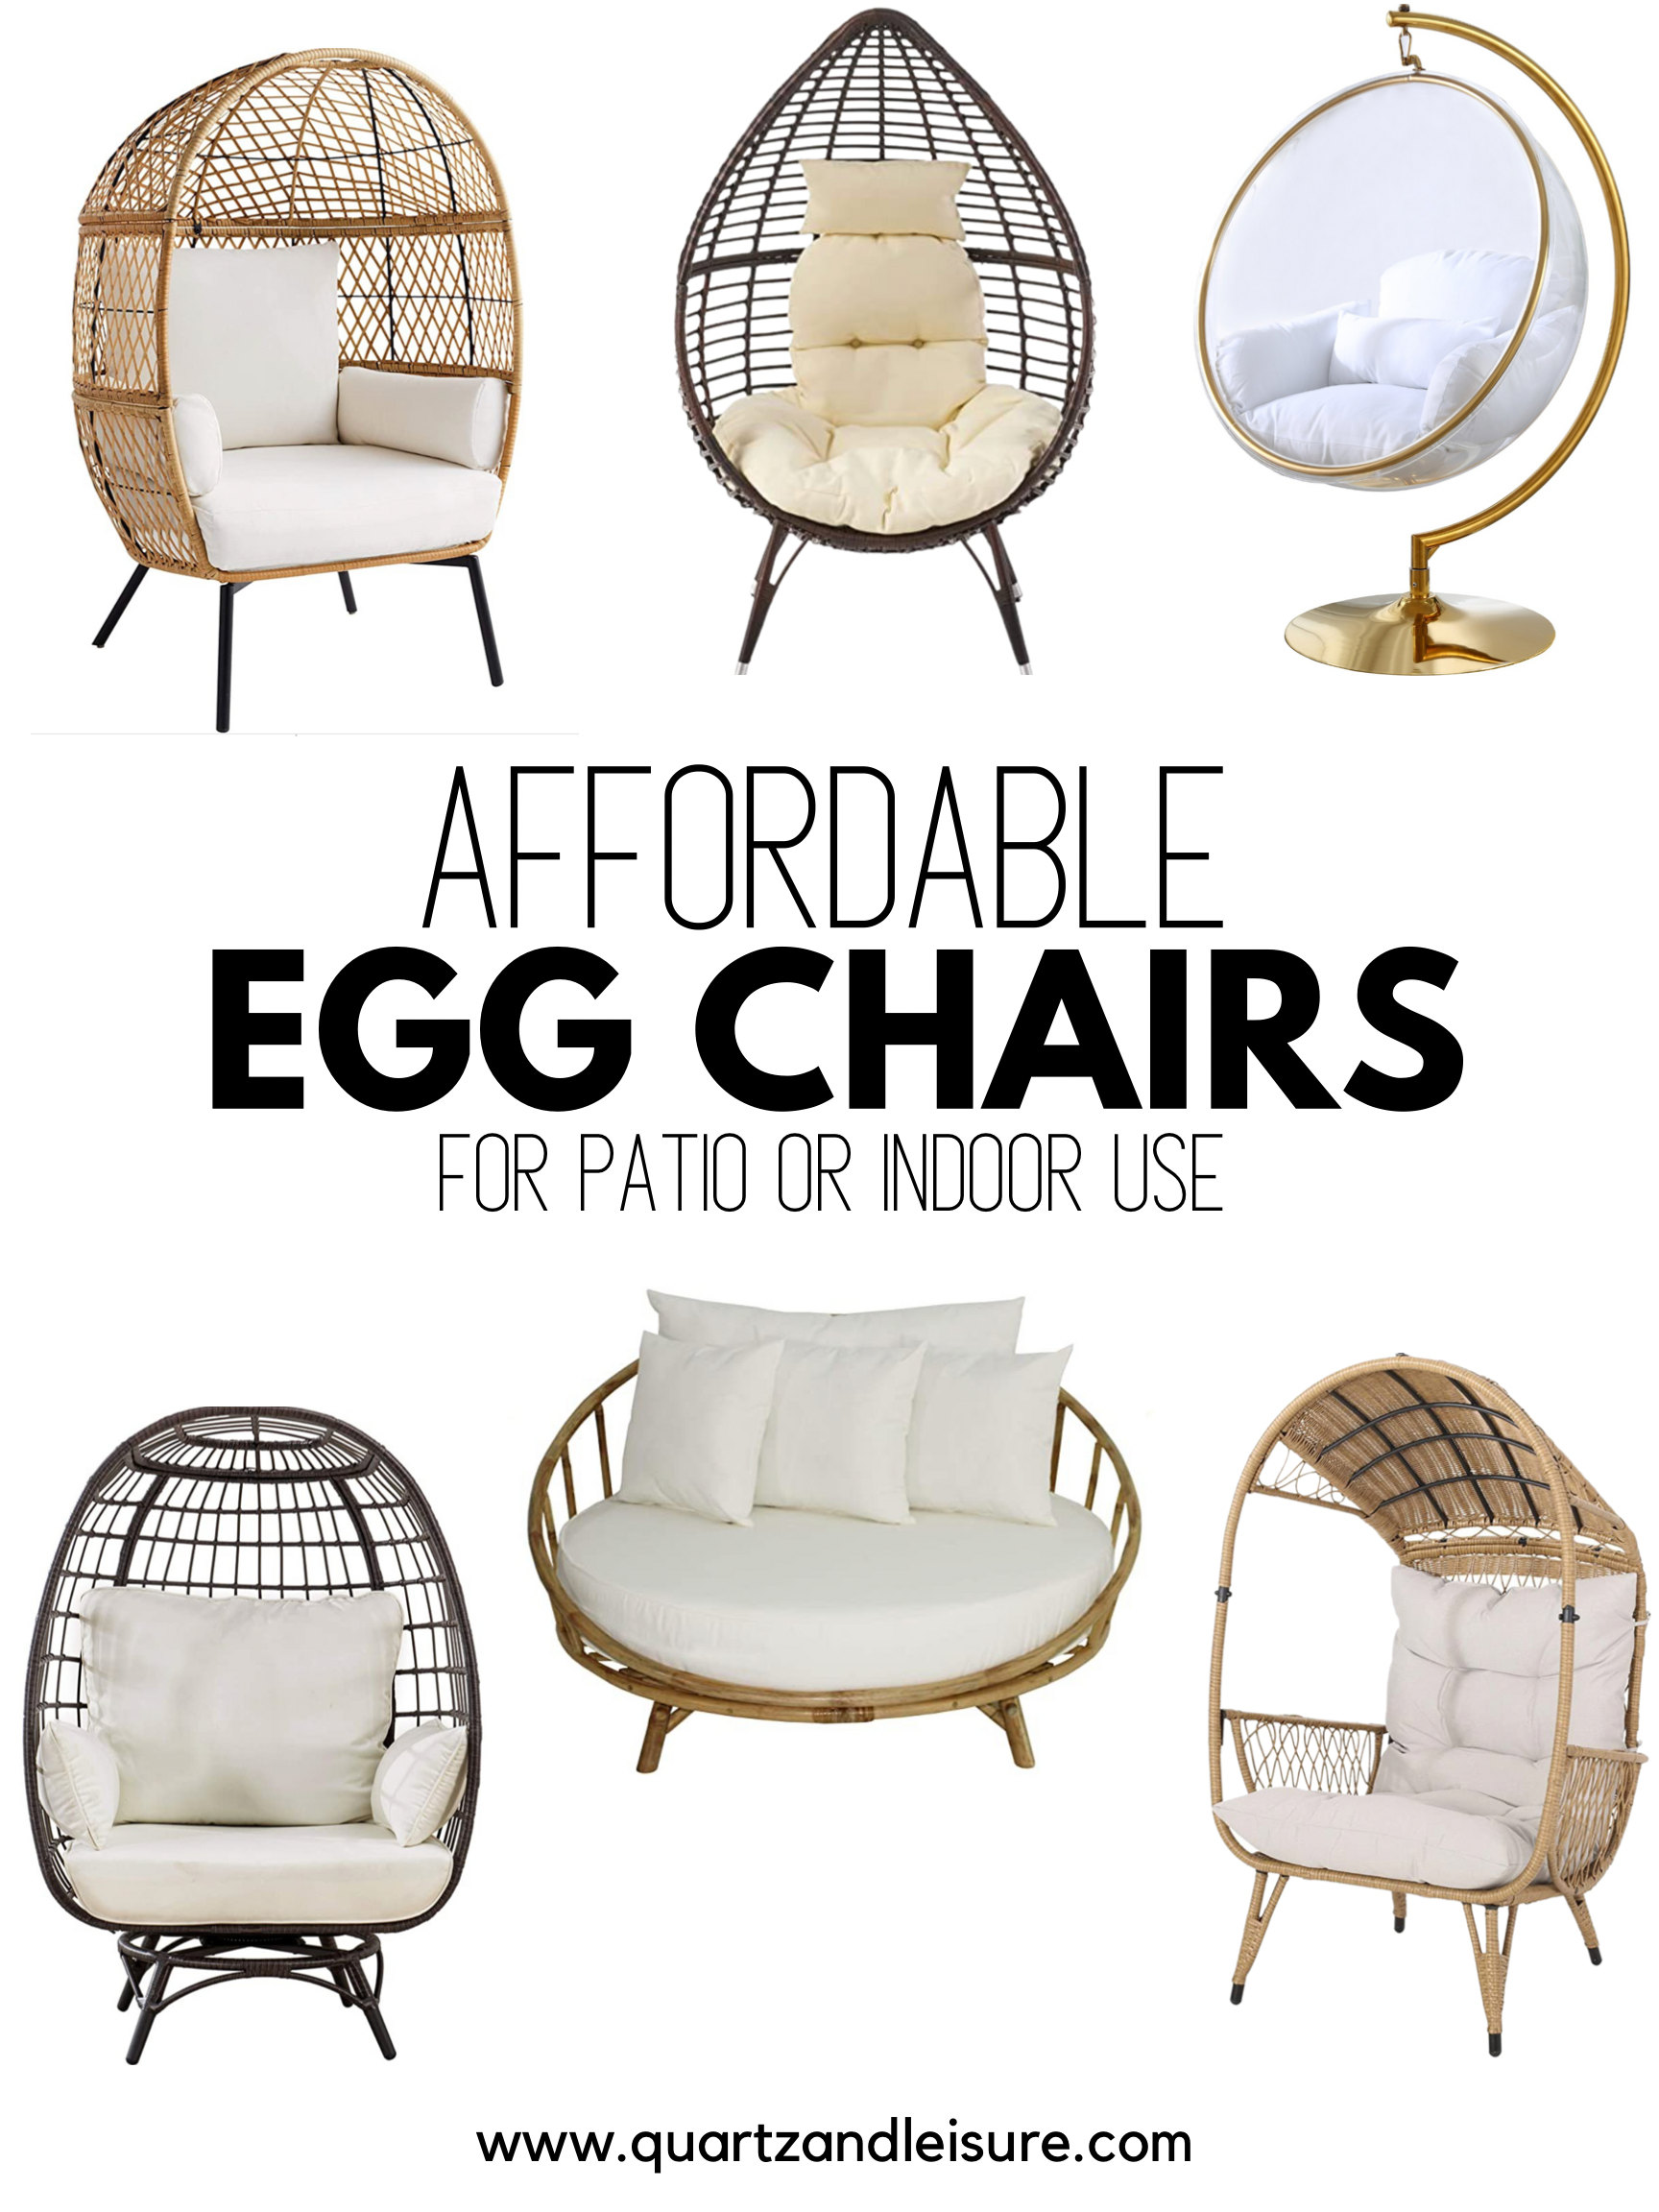 Cheap Egg Chair for Patio or Indoors